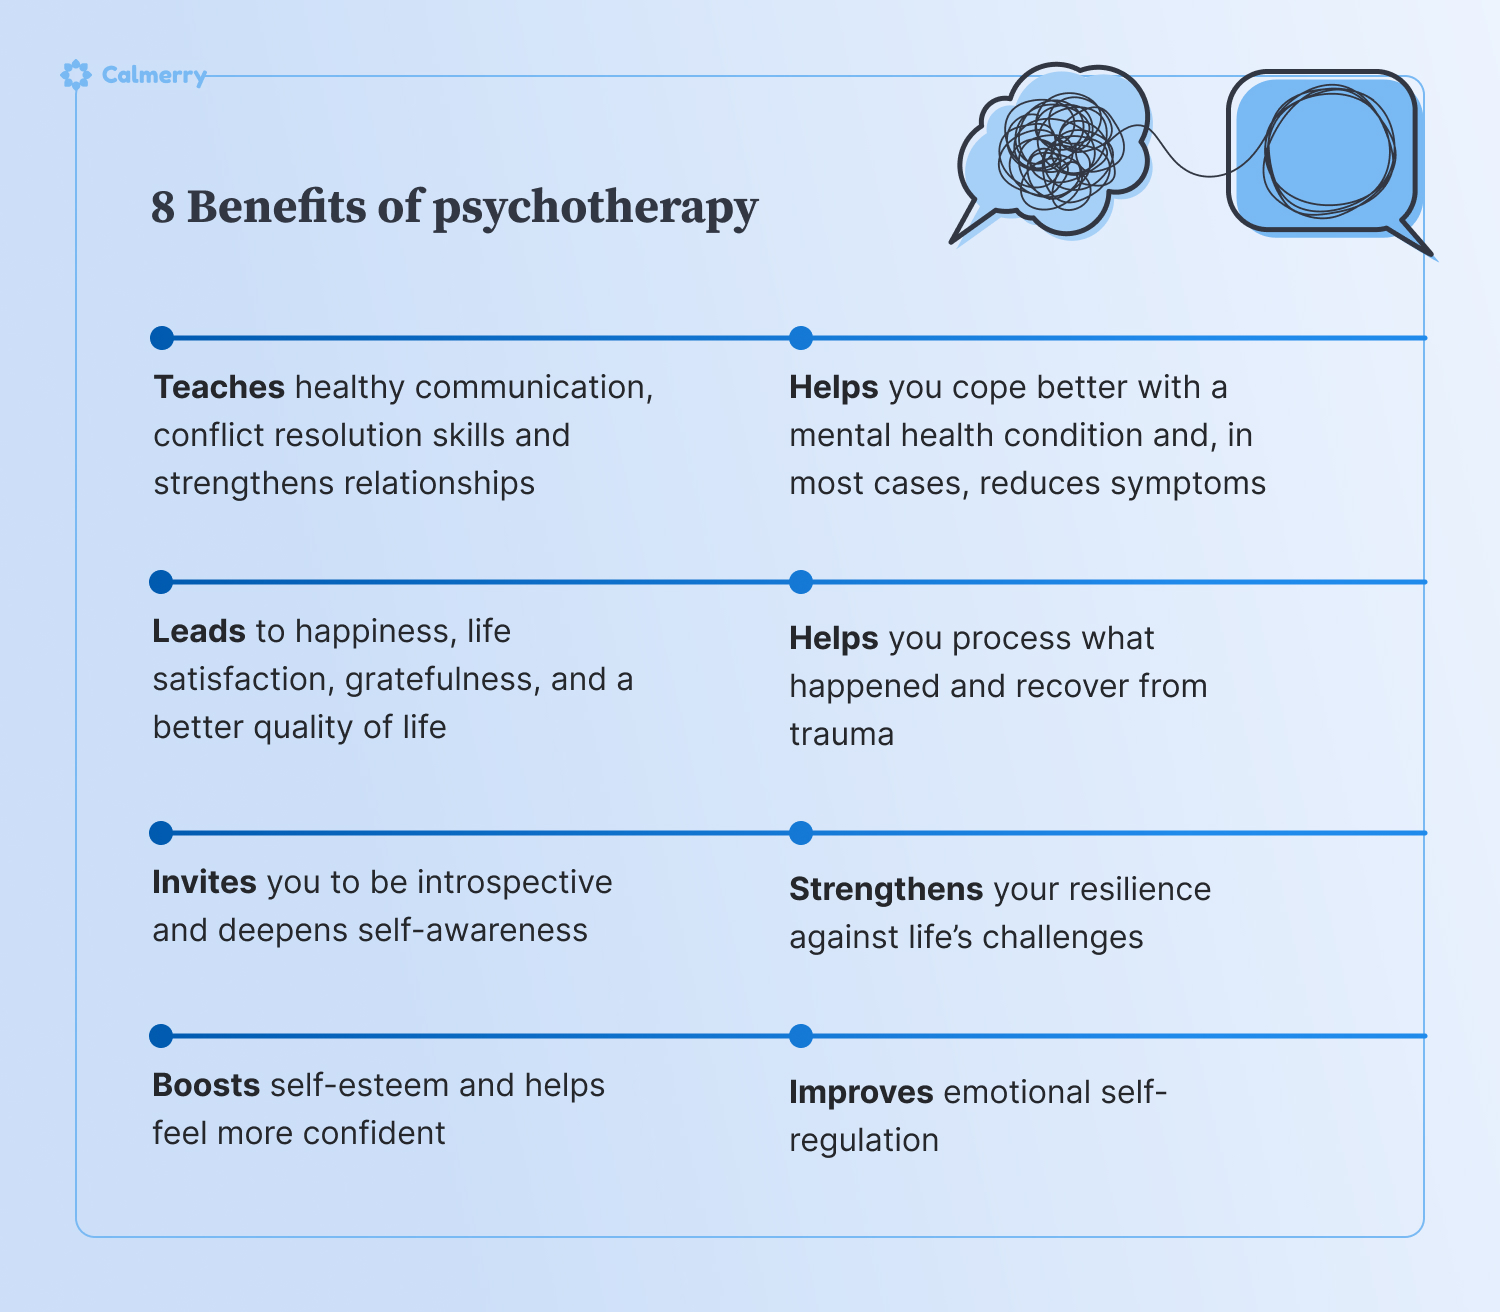  Benefits of psychotherapy Helps you cope better with a mental health condition and, in most cases, reduces symptoms Helps you process what happened and recover from trauma Teaches healthy communication, conflict resolution skills and strengthens relationships Strengthens your resilience against life’s challenges Improves emotional self-regulation Boosts self-esteem and helps feel more confident Invites you to be introspective and deepens self-awareness Leads to happiness, life satisfaction, gratefulness, and a better quality of life